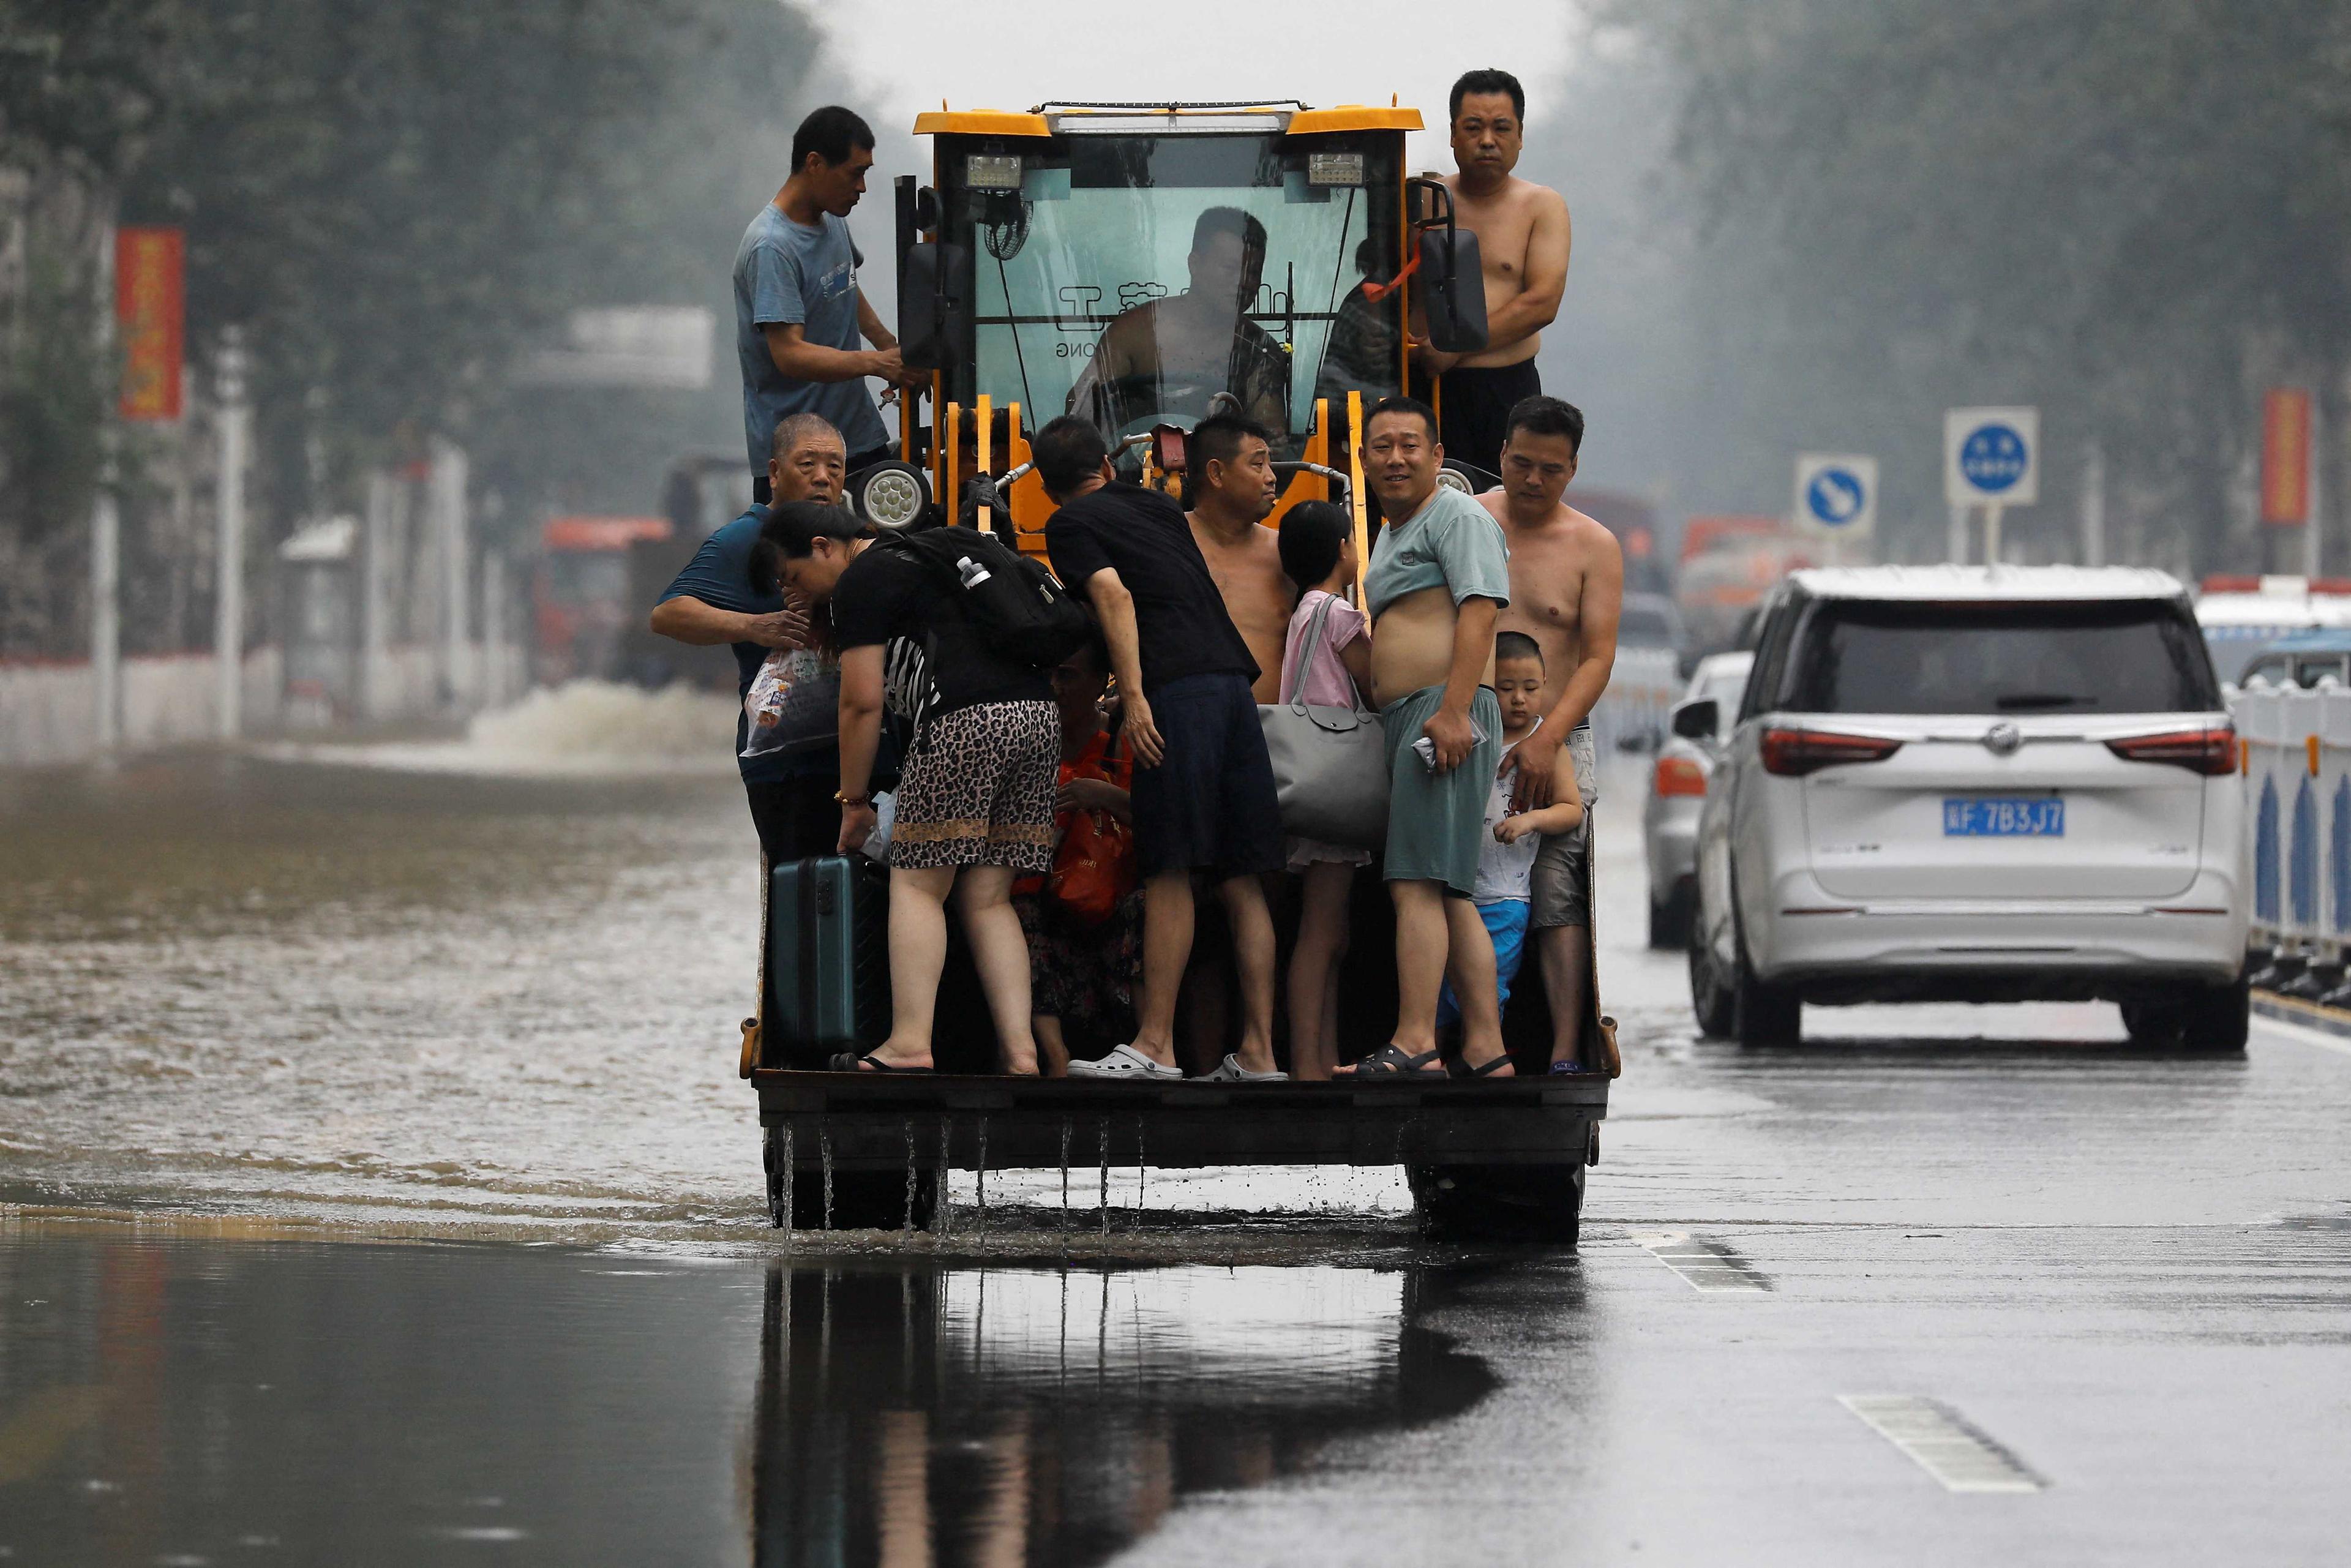 A man operates a front loader to evacuate people through a flooded road after the rains and floods brought by remnants of Typhoon Doksuri, in Zhuozhou, Hebei province, China Aug 3. Photo: Reuters